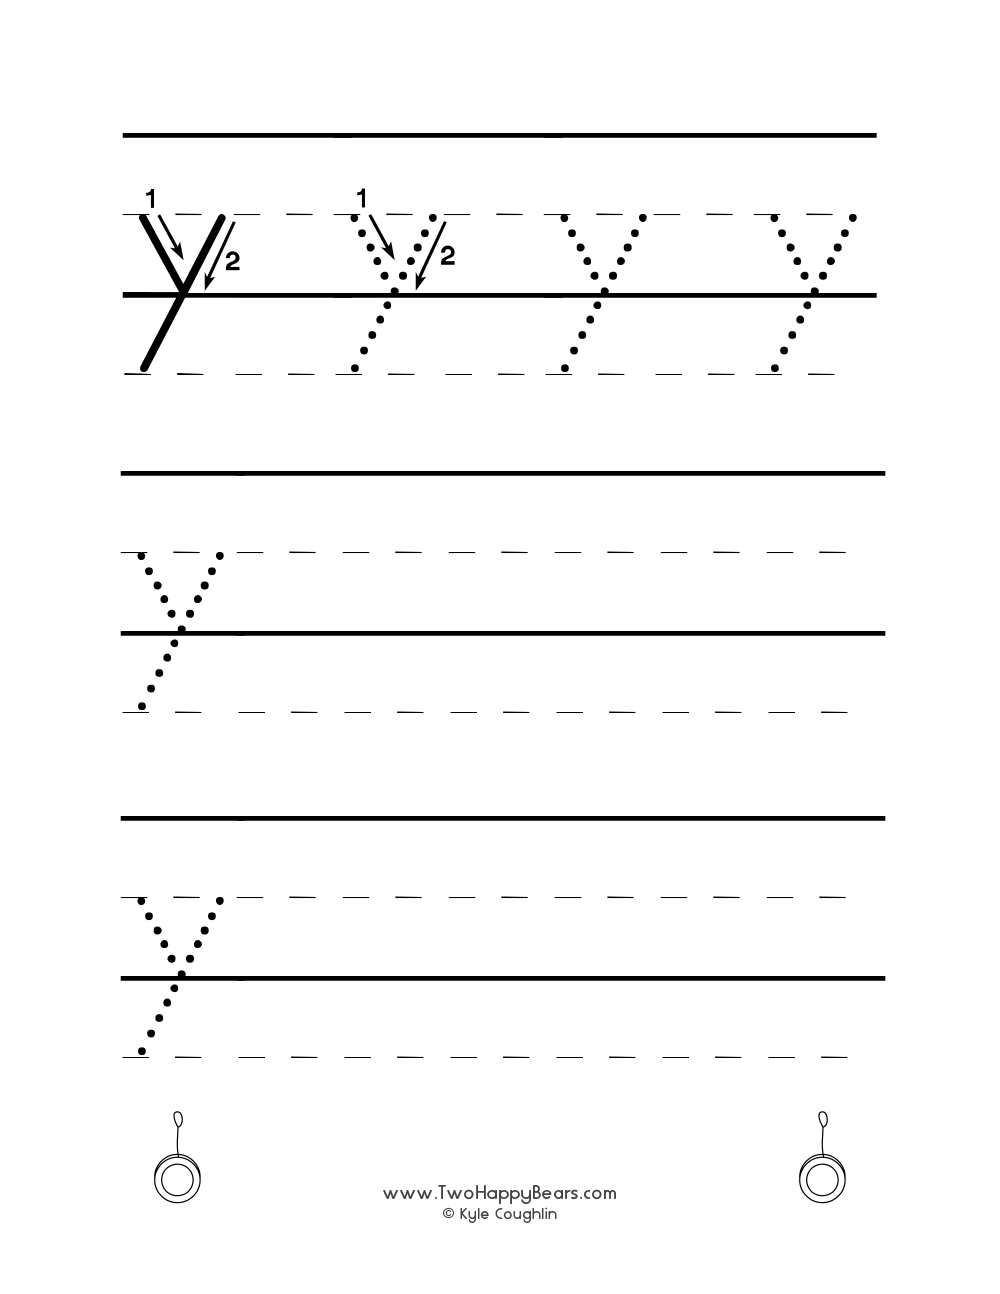 Worksheet for tracing and writing the lowercase letter Y, in free printable PDF format.